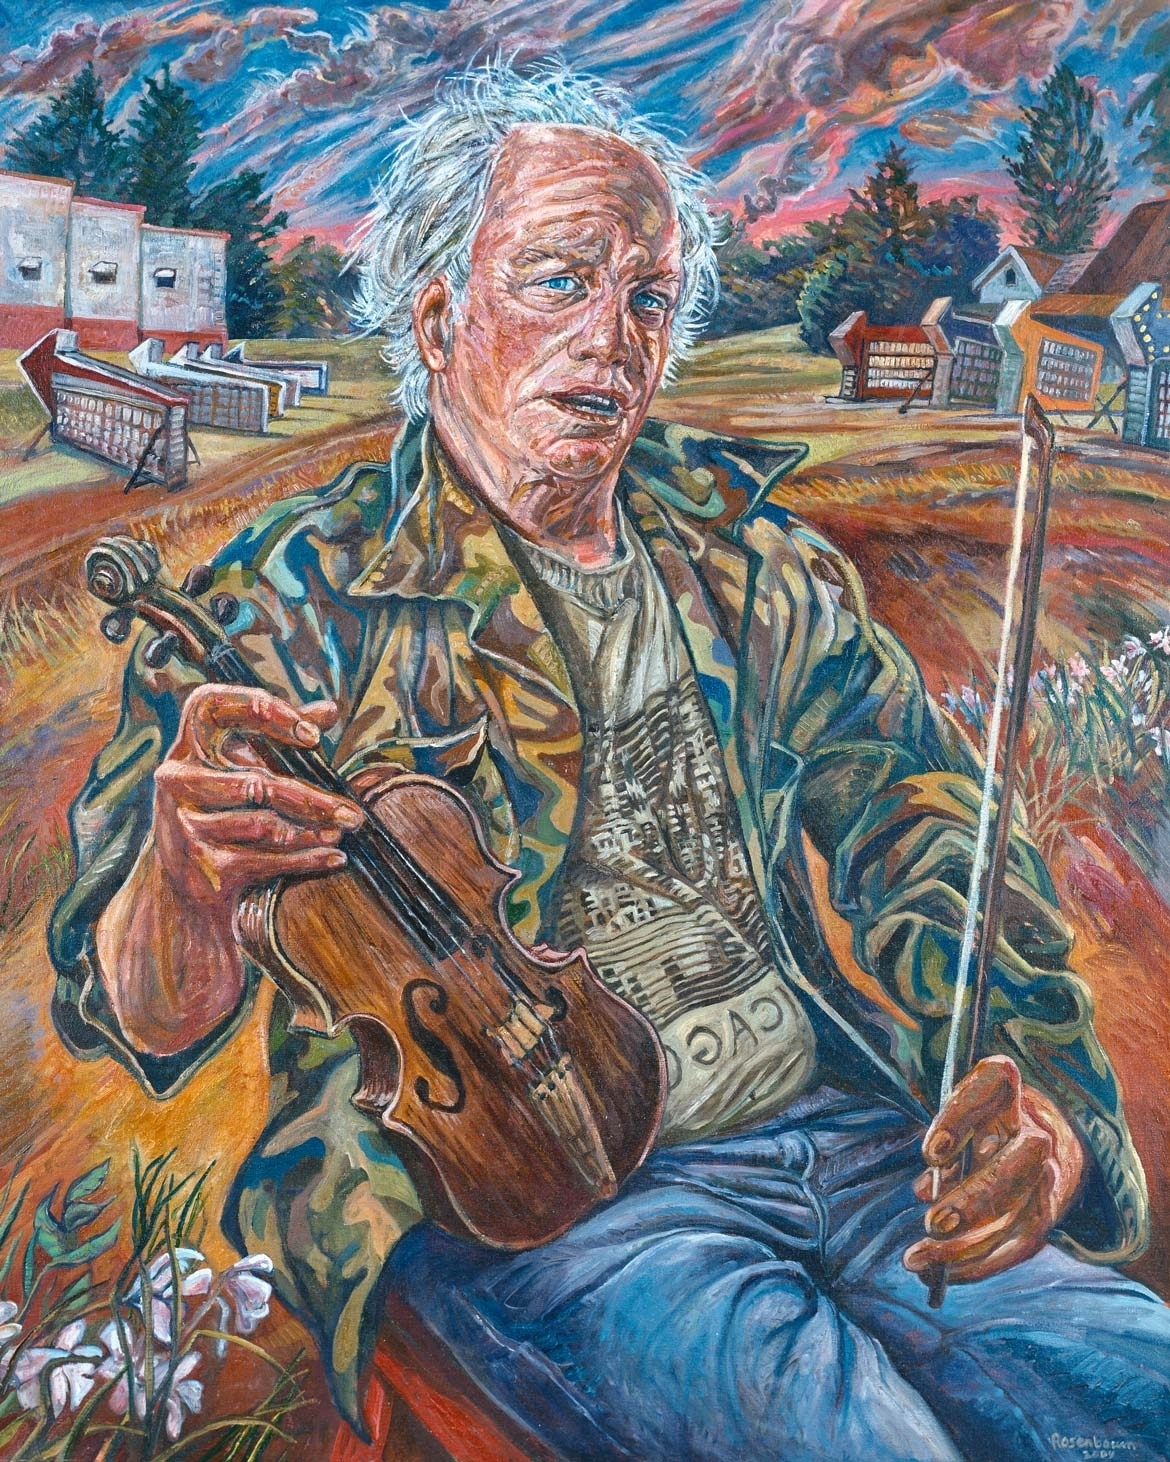 "Self-Portrait with Fiddle" by Art Rosenbaum is on display at Reece Museum, Johnson City, Tennessee.